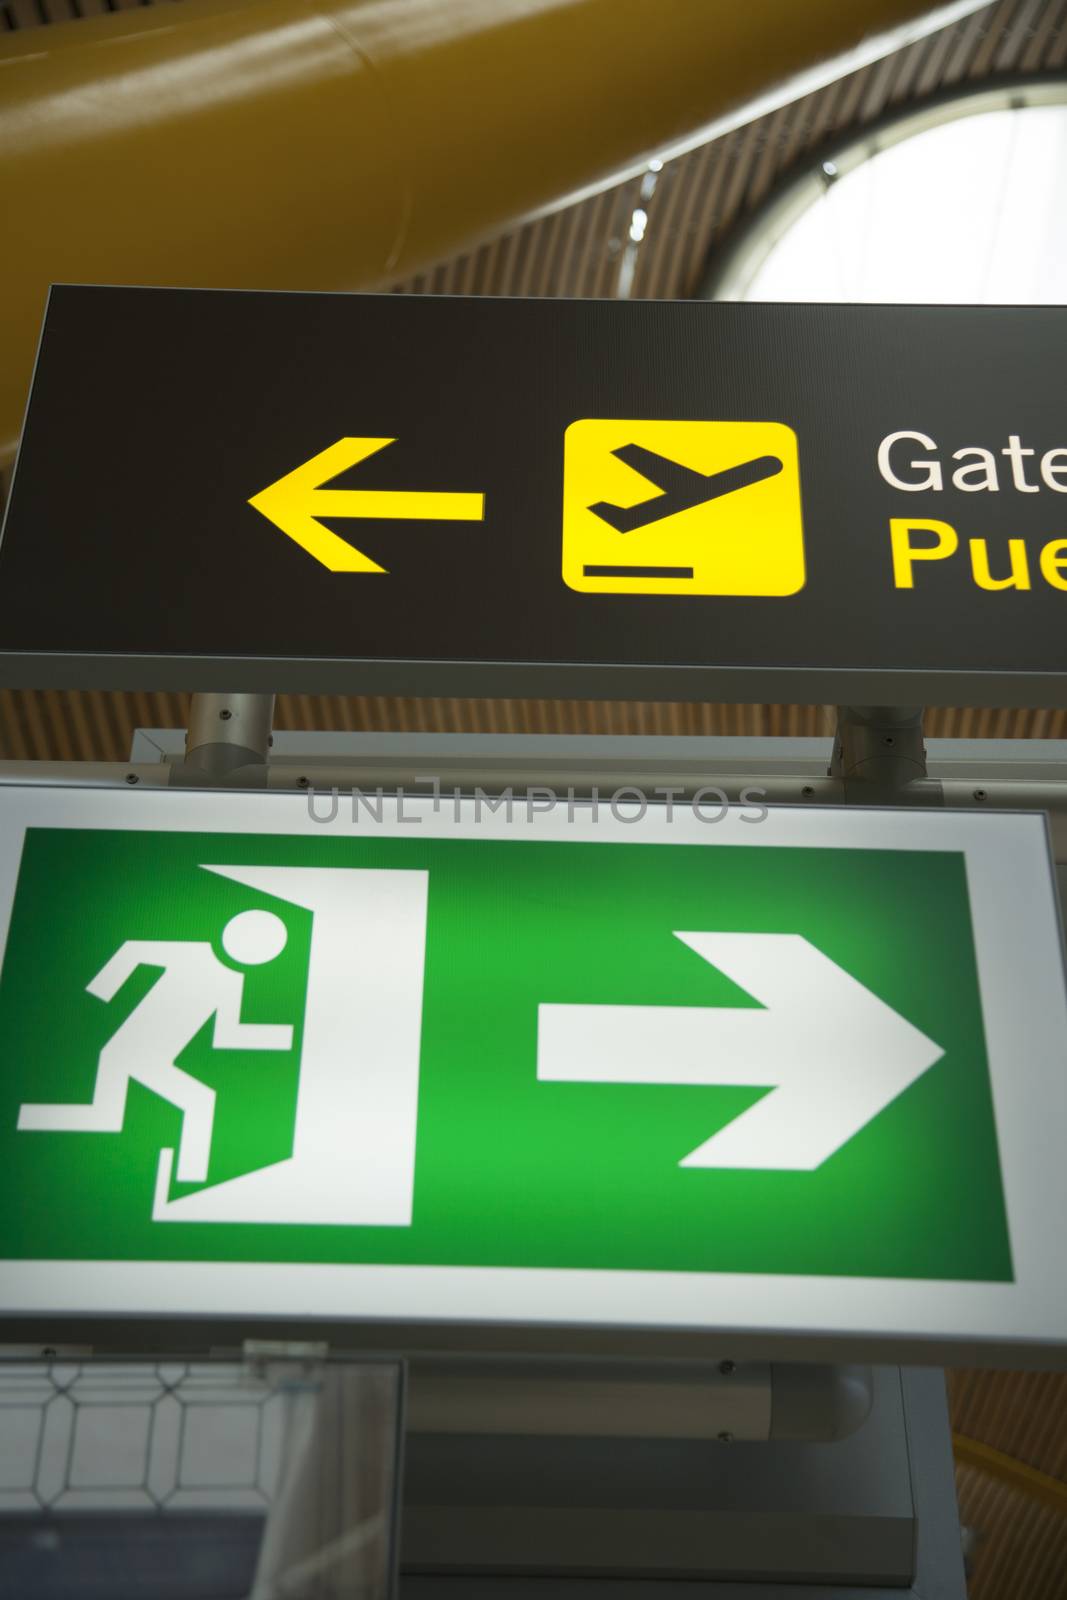 emergency exit and departure fly gate signals inside airport hall